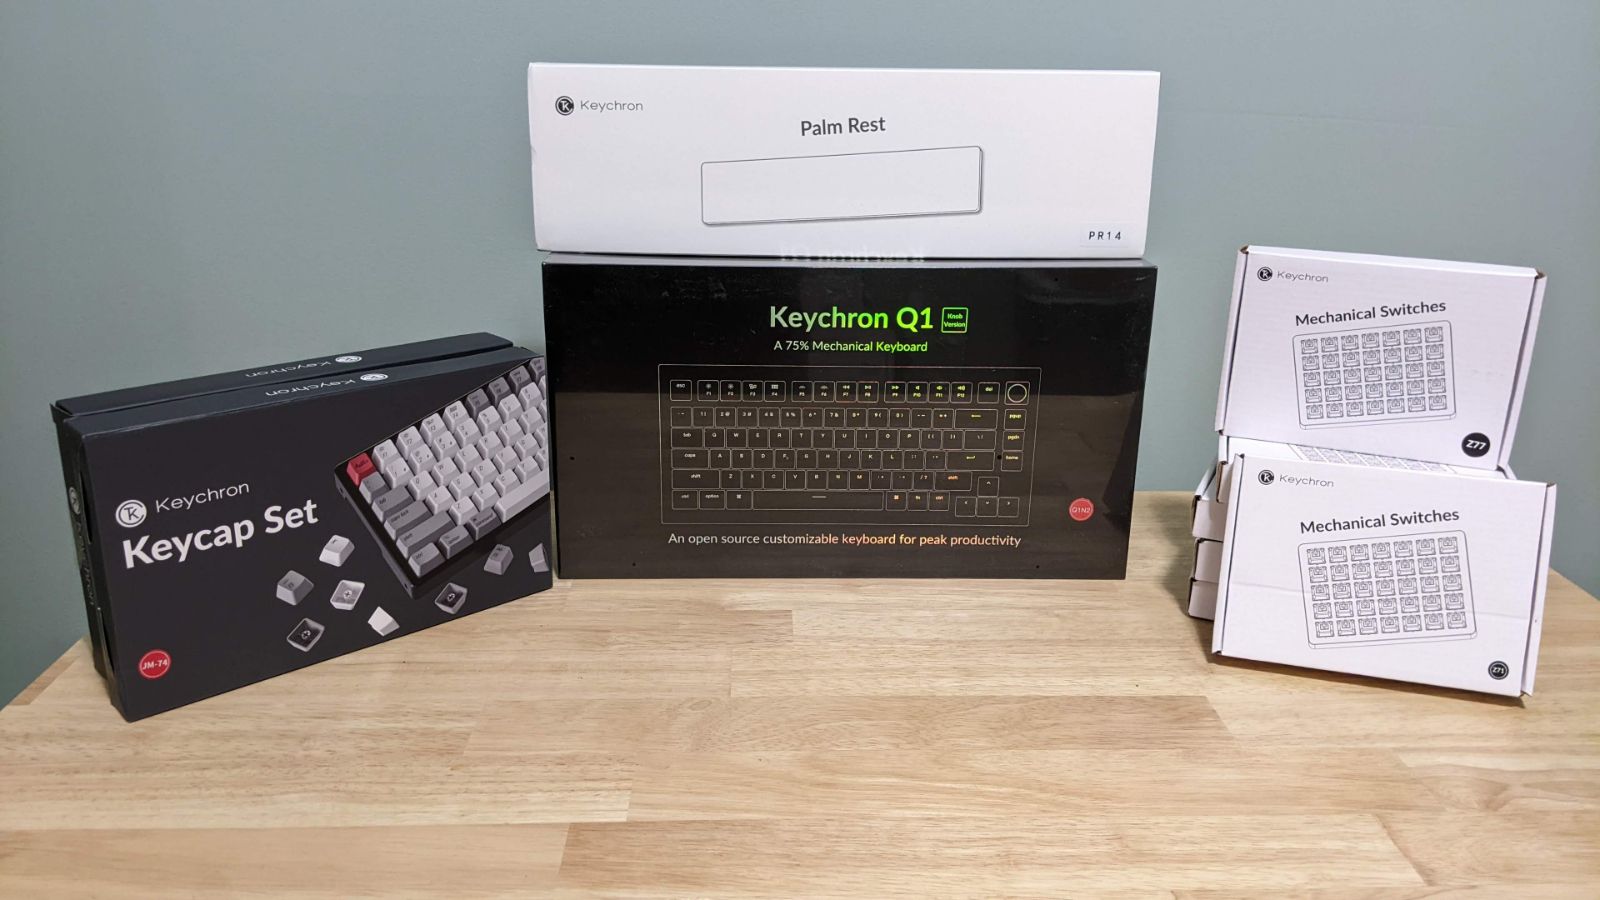 Keychron Q1 box with various accessories.